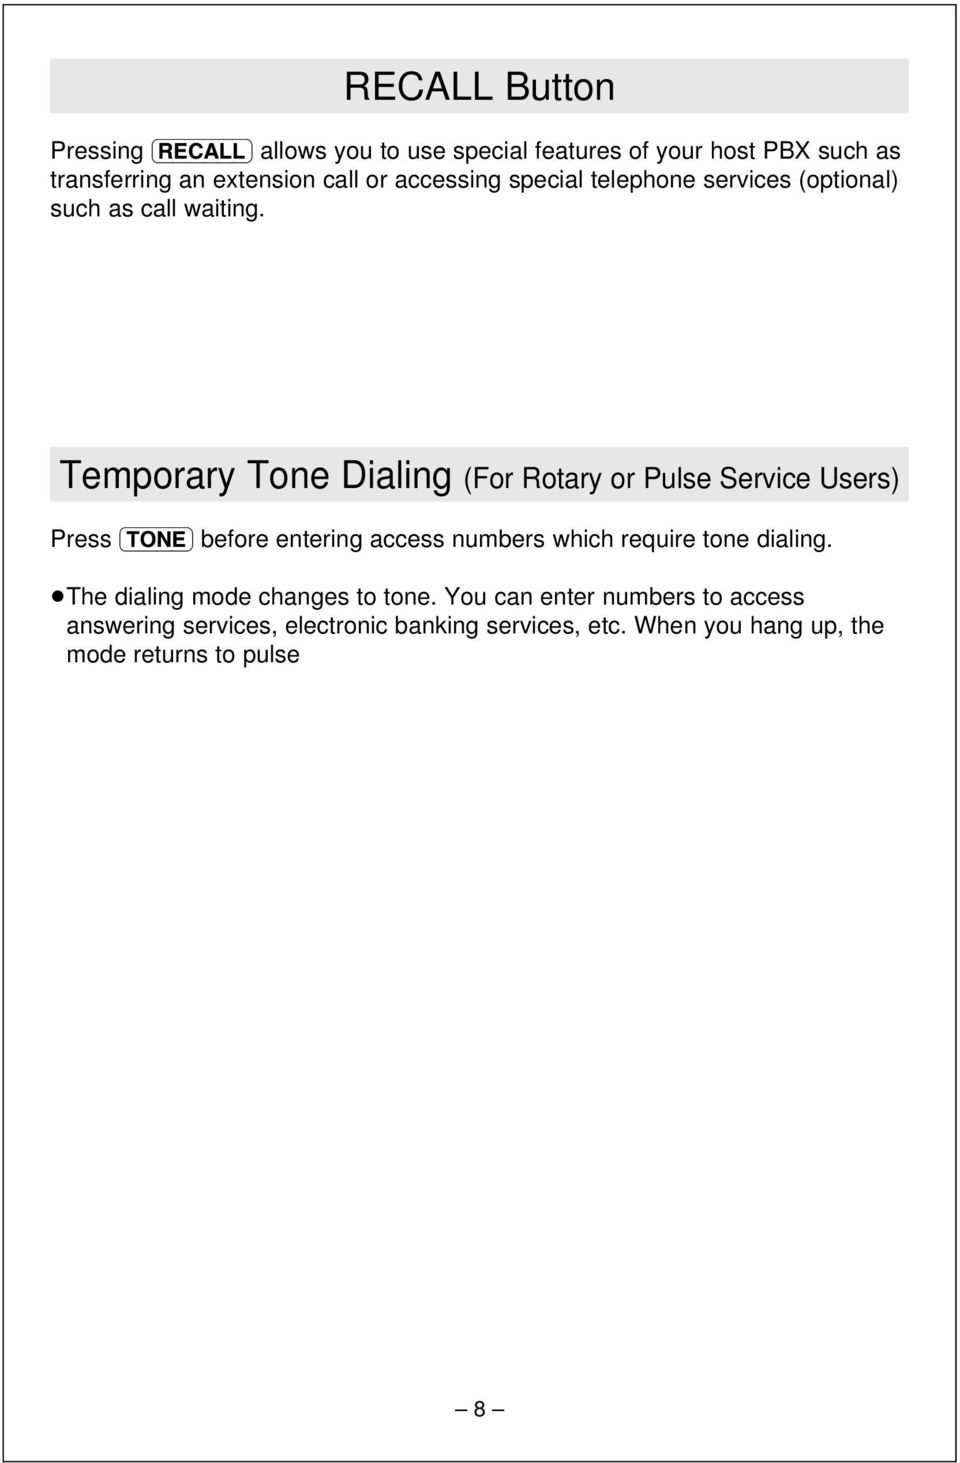 Temporary Tone Dialing (For Rotary or Pulse Service Users) Press (TONE) before entering access numbers which require tone